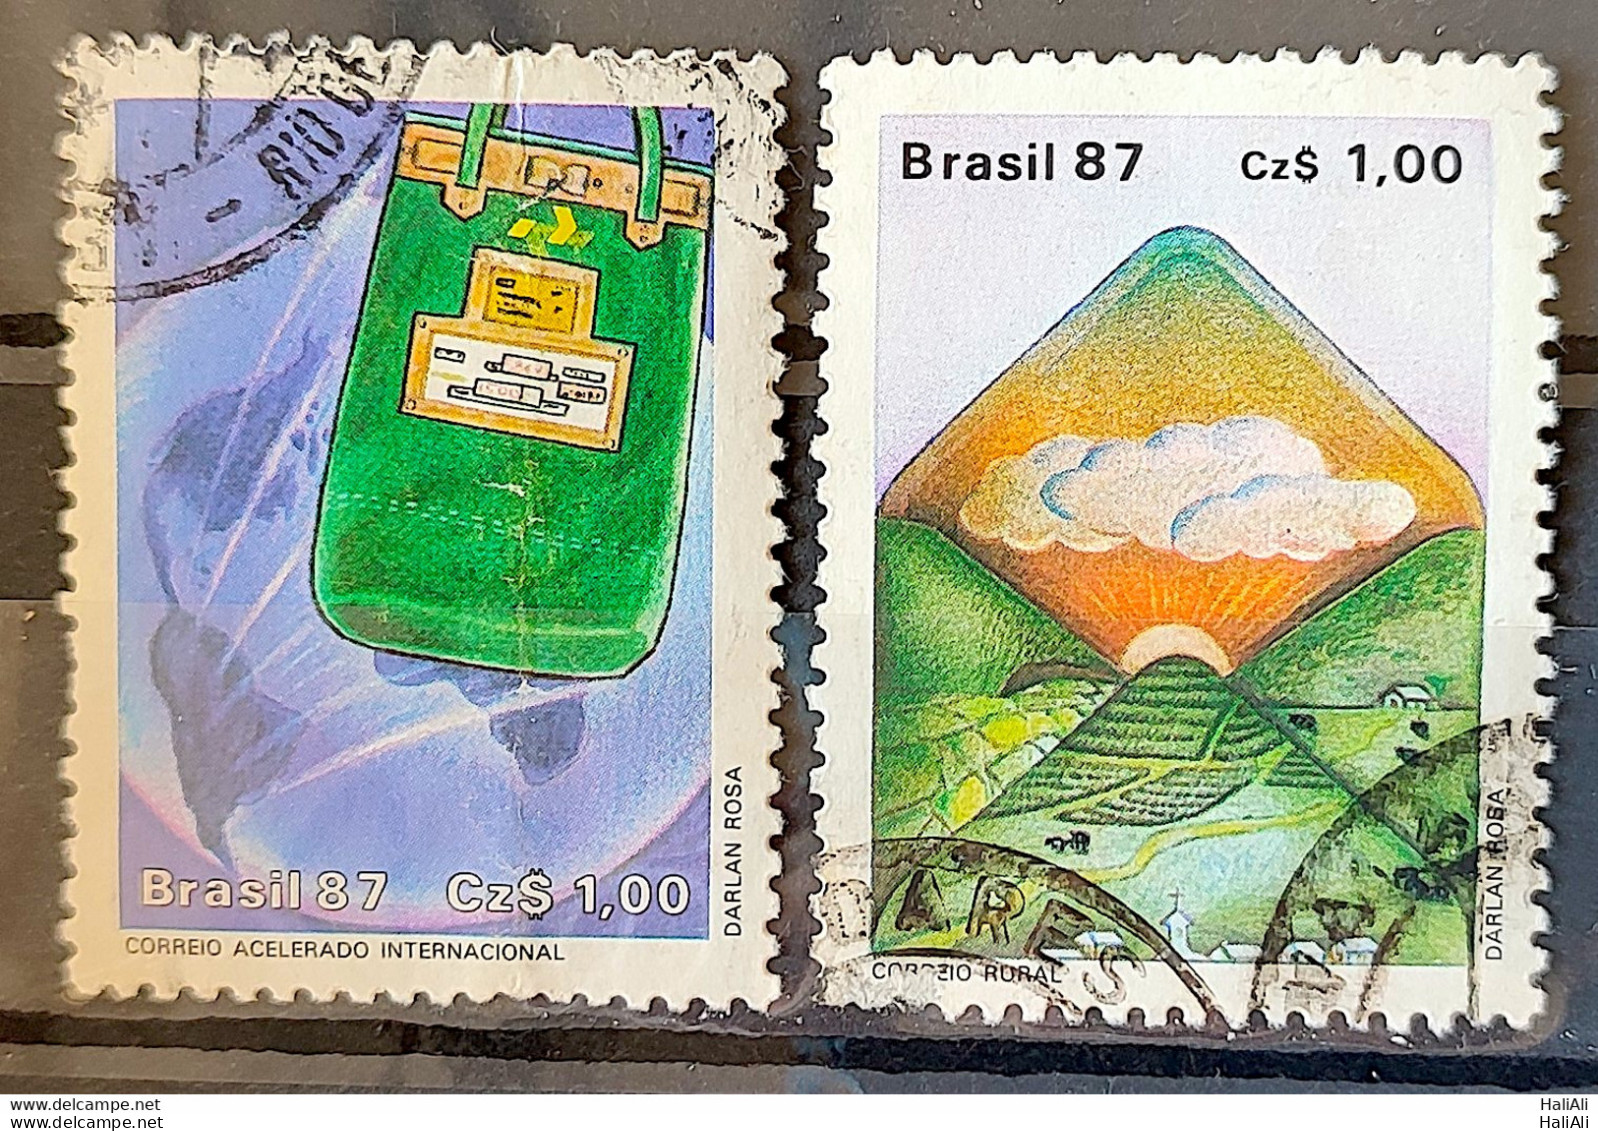 C 1545 Brazil Stamp Postal Service Malote Letter 1987 Complete Series Circulated 5 - Usados